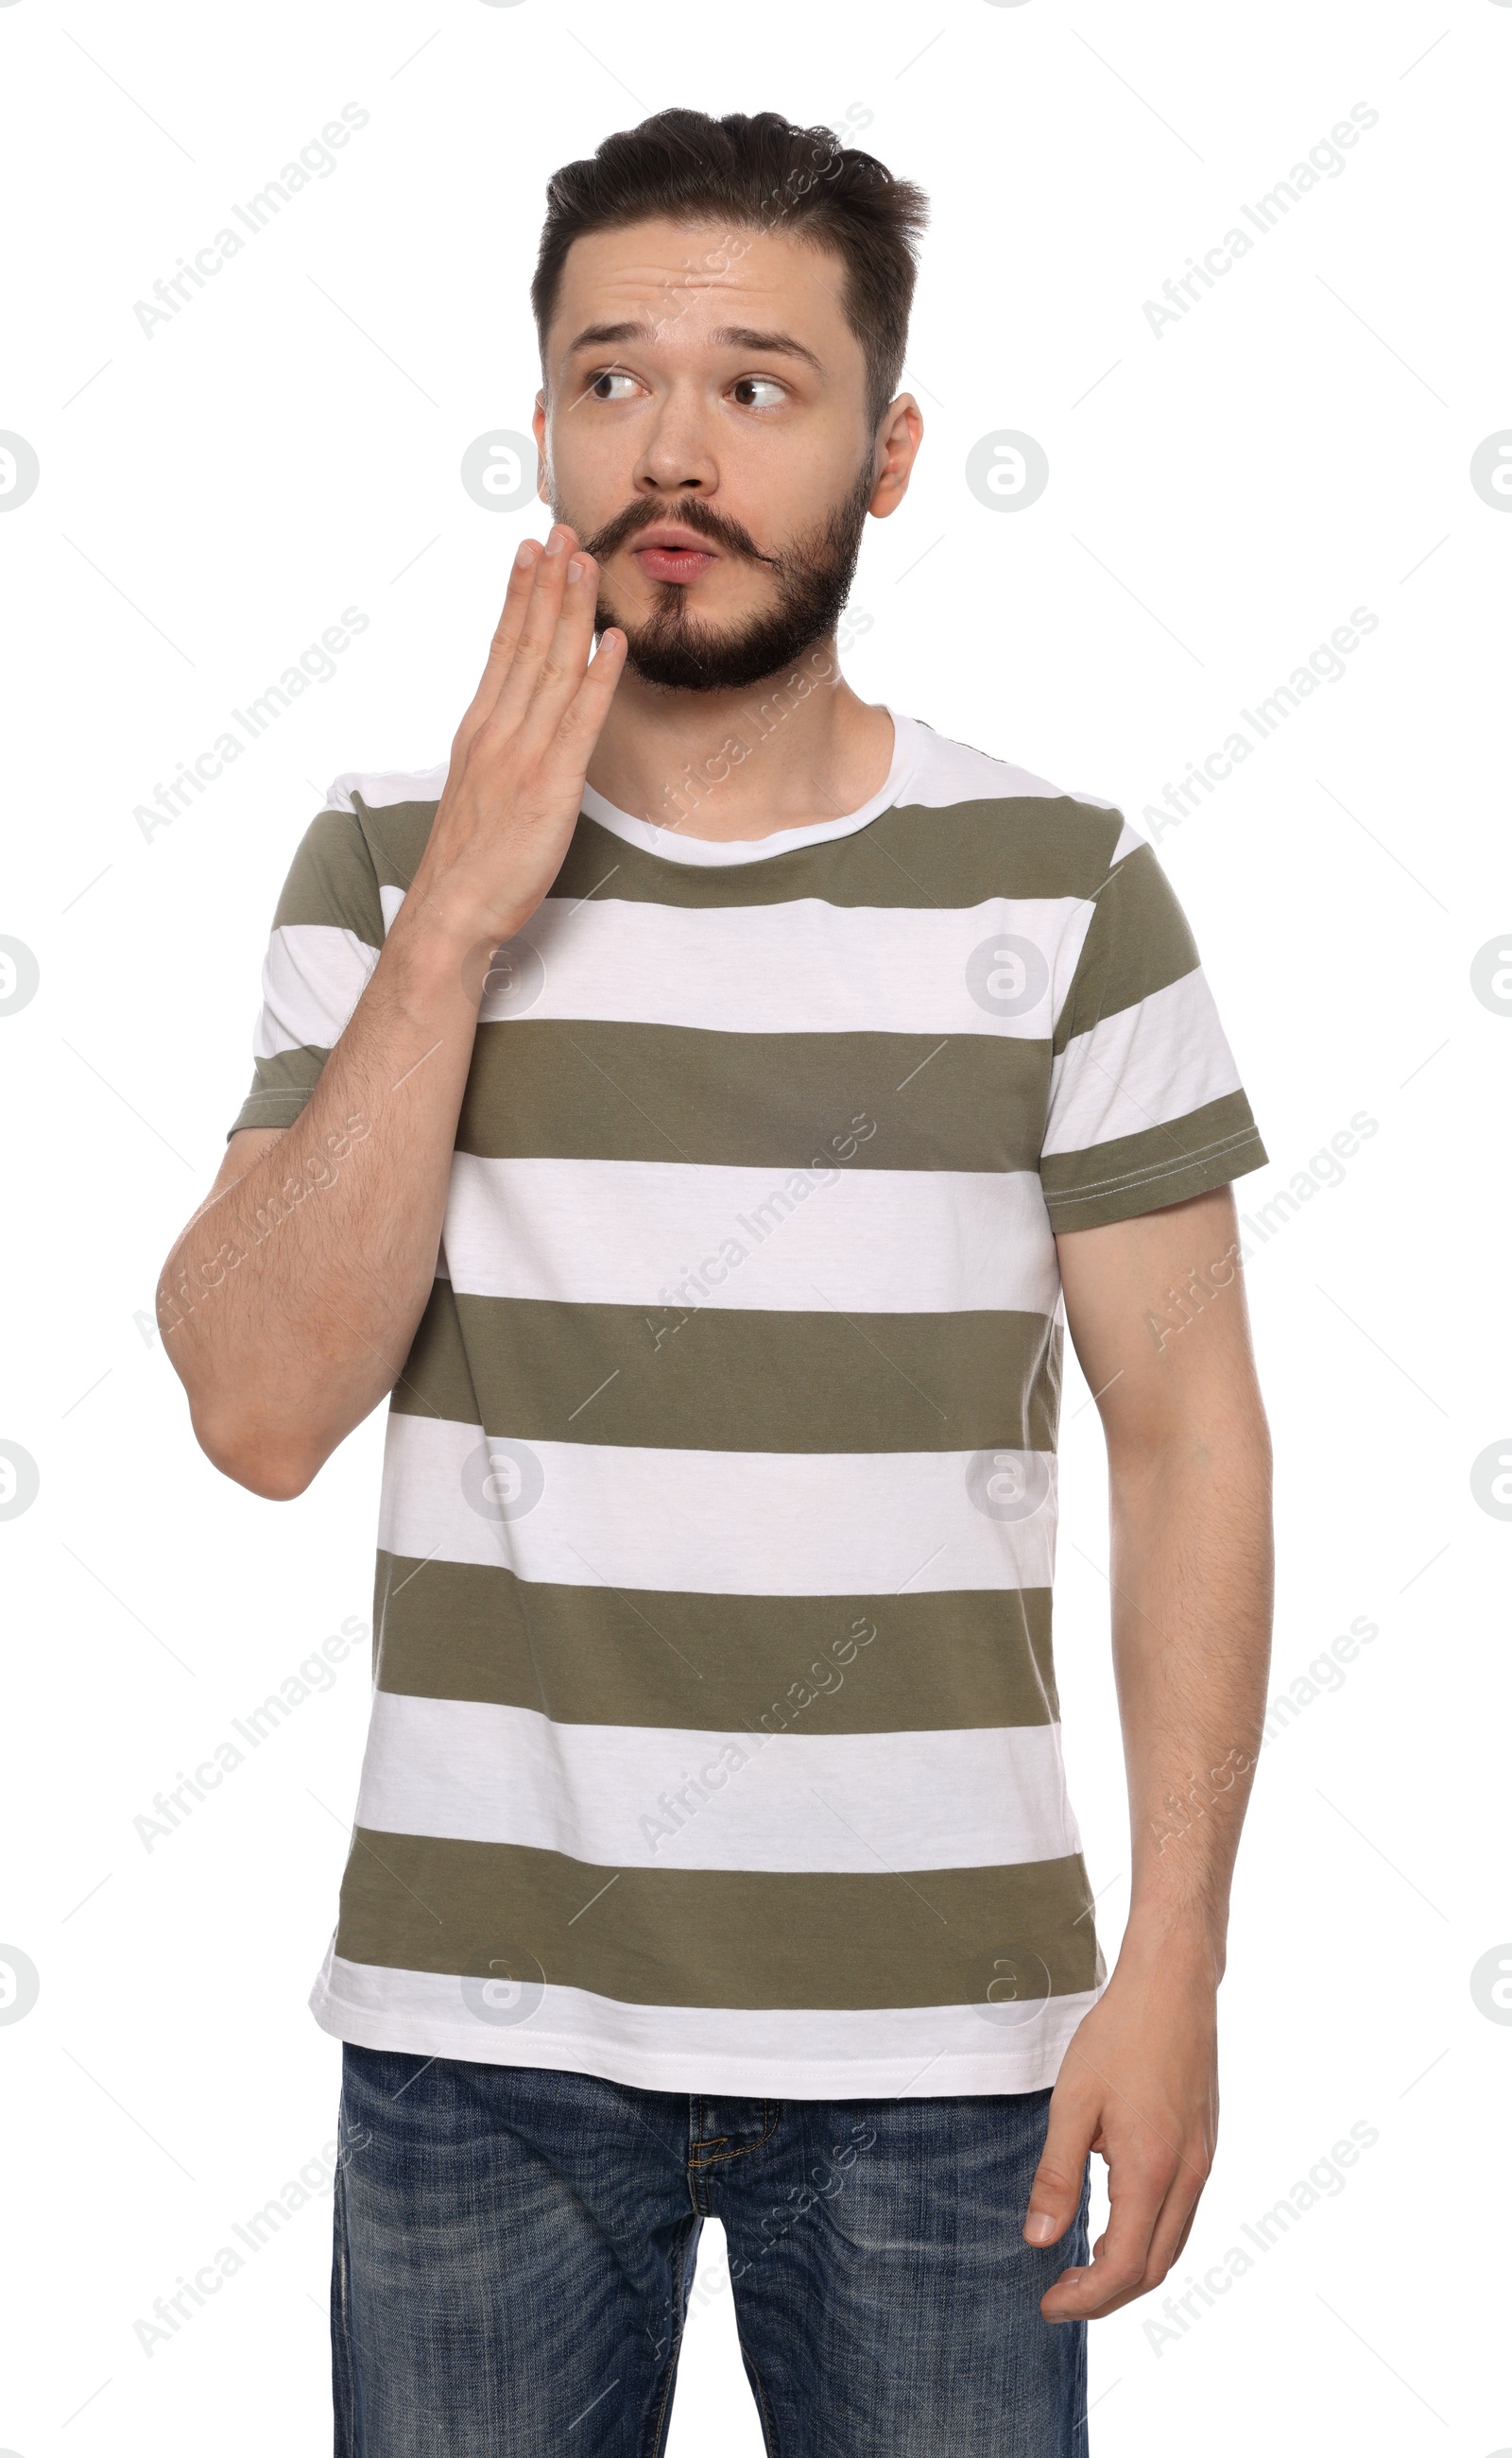 Photo of Embarrassed man covering mouth with hand on white background